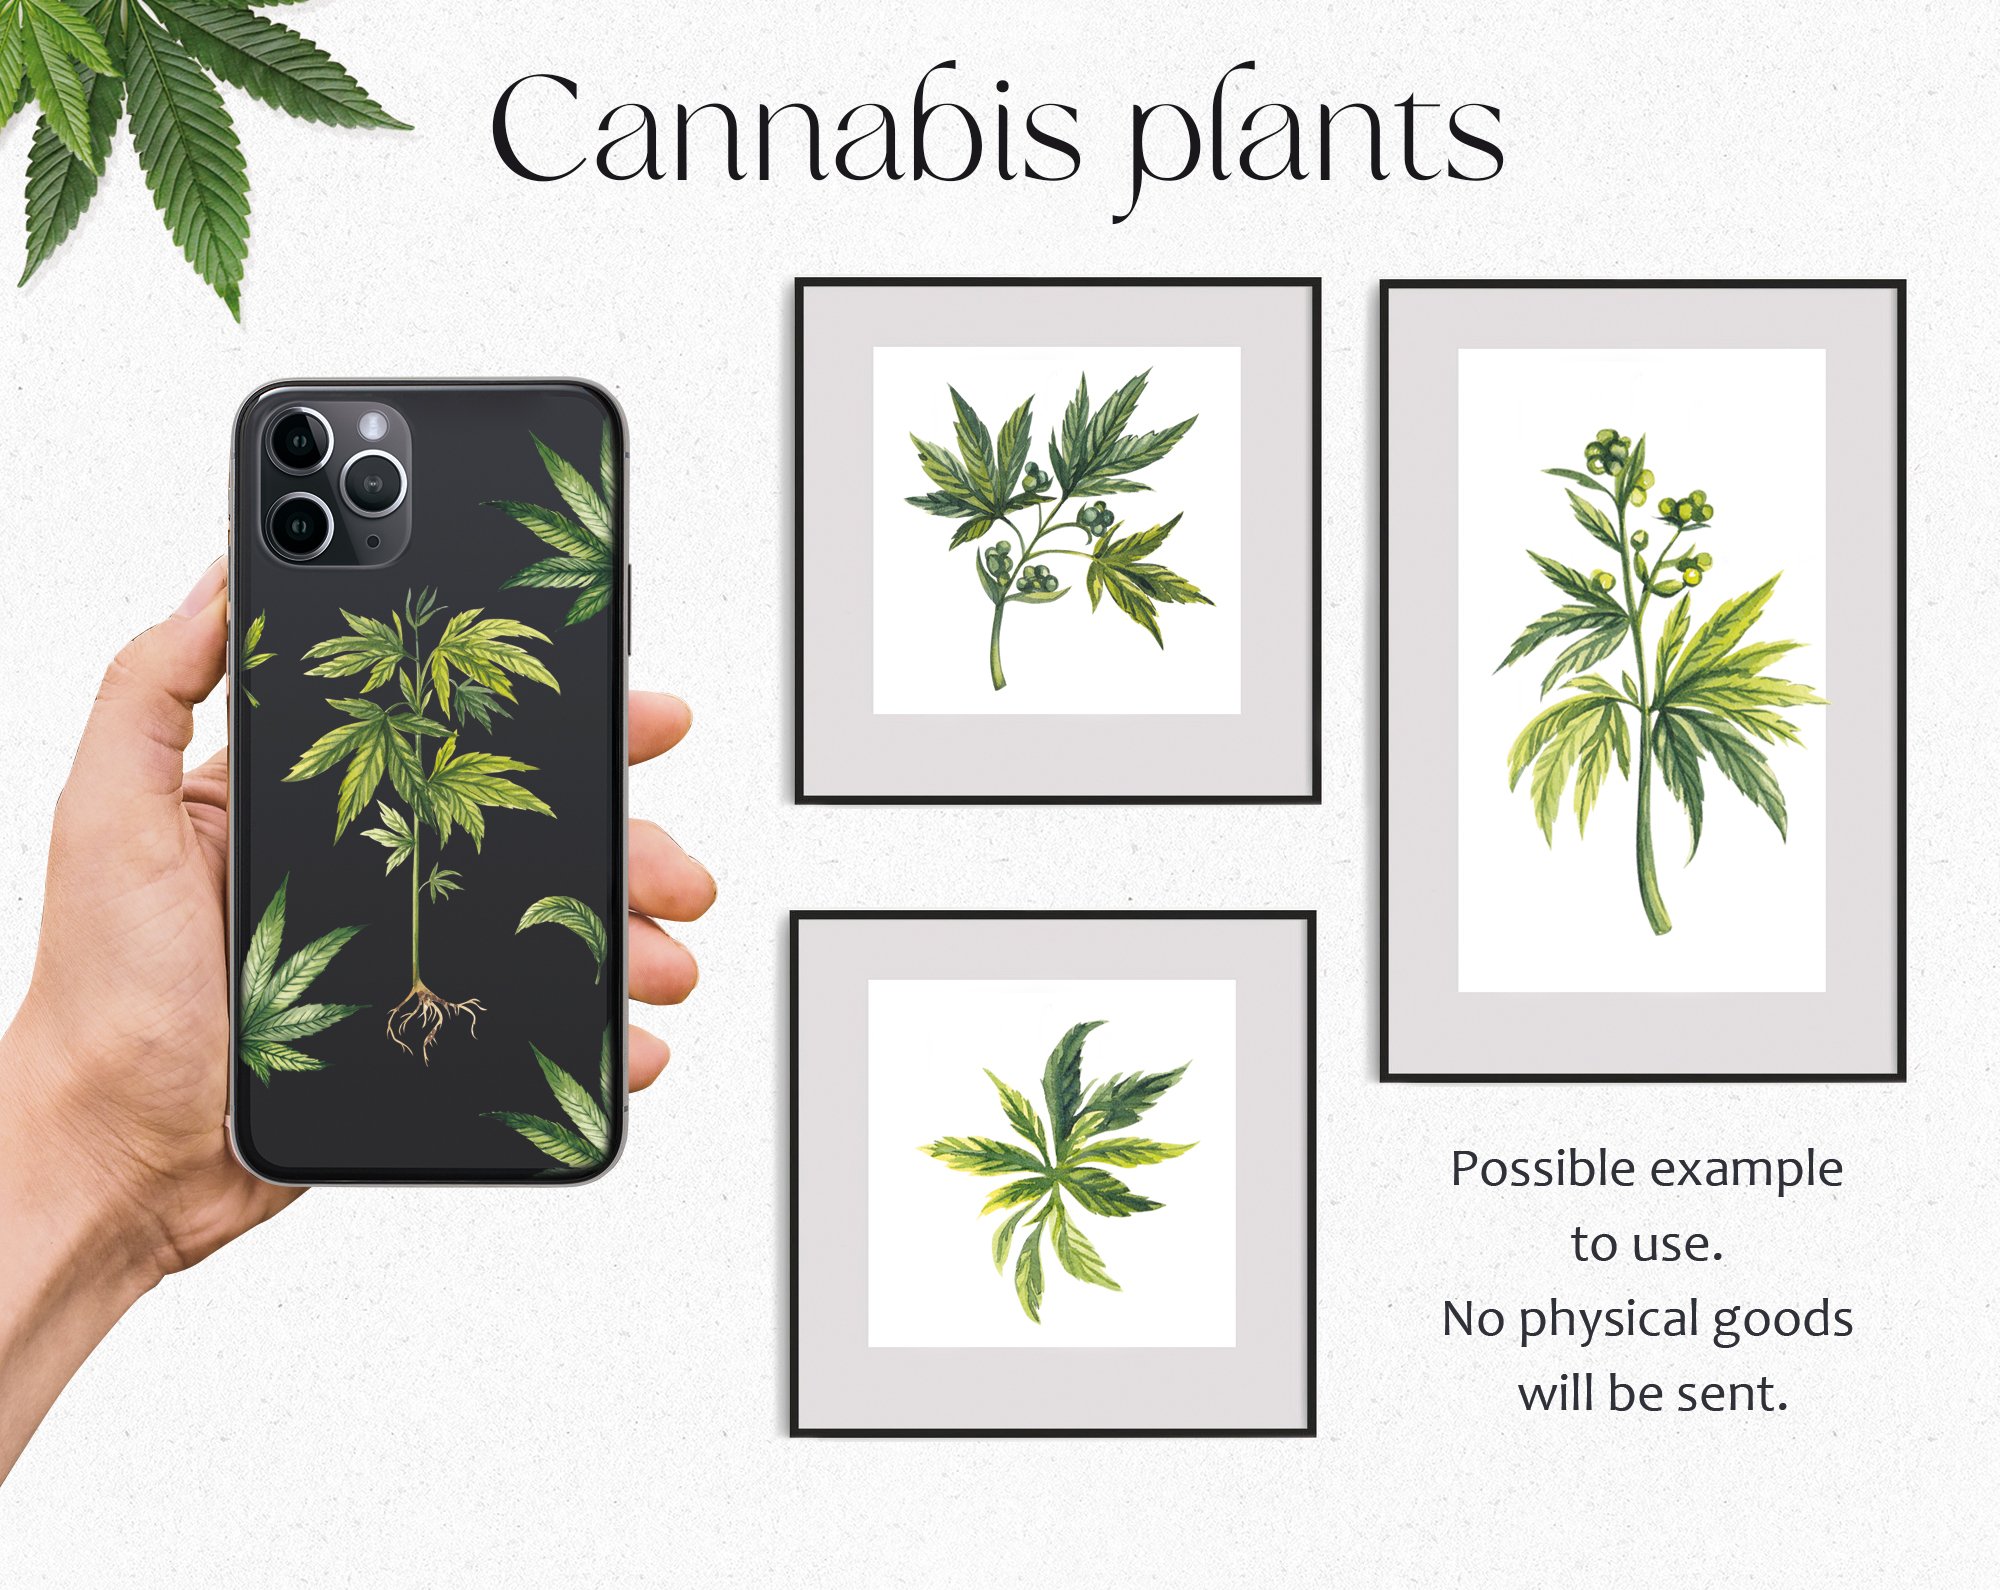 Cannabis plants on the iPhone case.